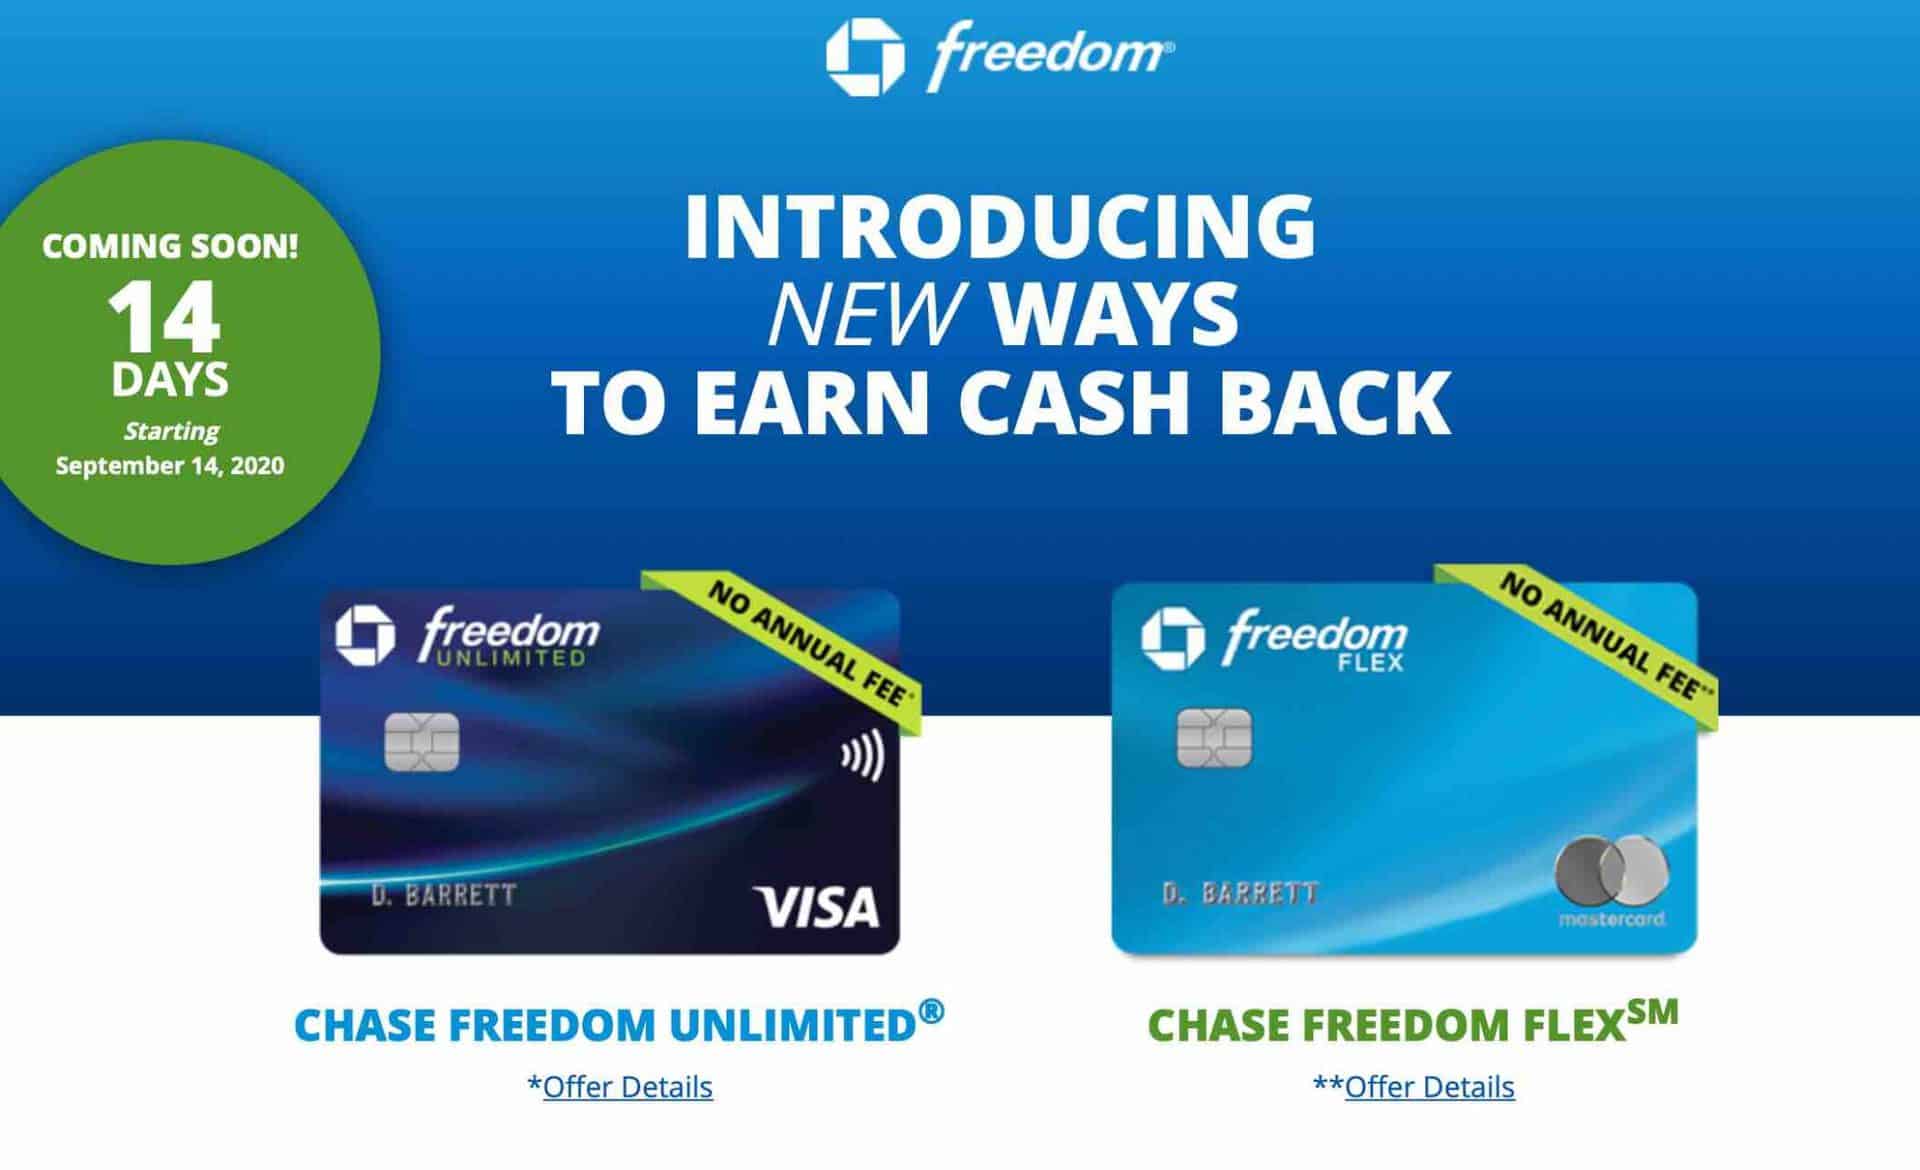 chase-to-launch-freedom-flex-enhance-freedom-unlimited